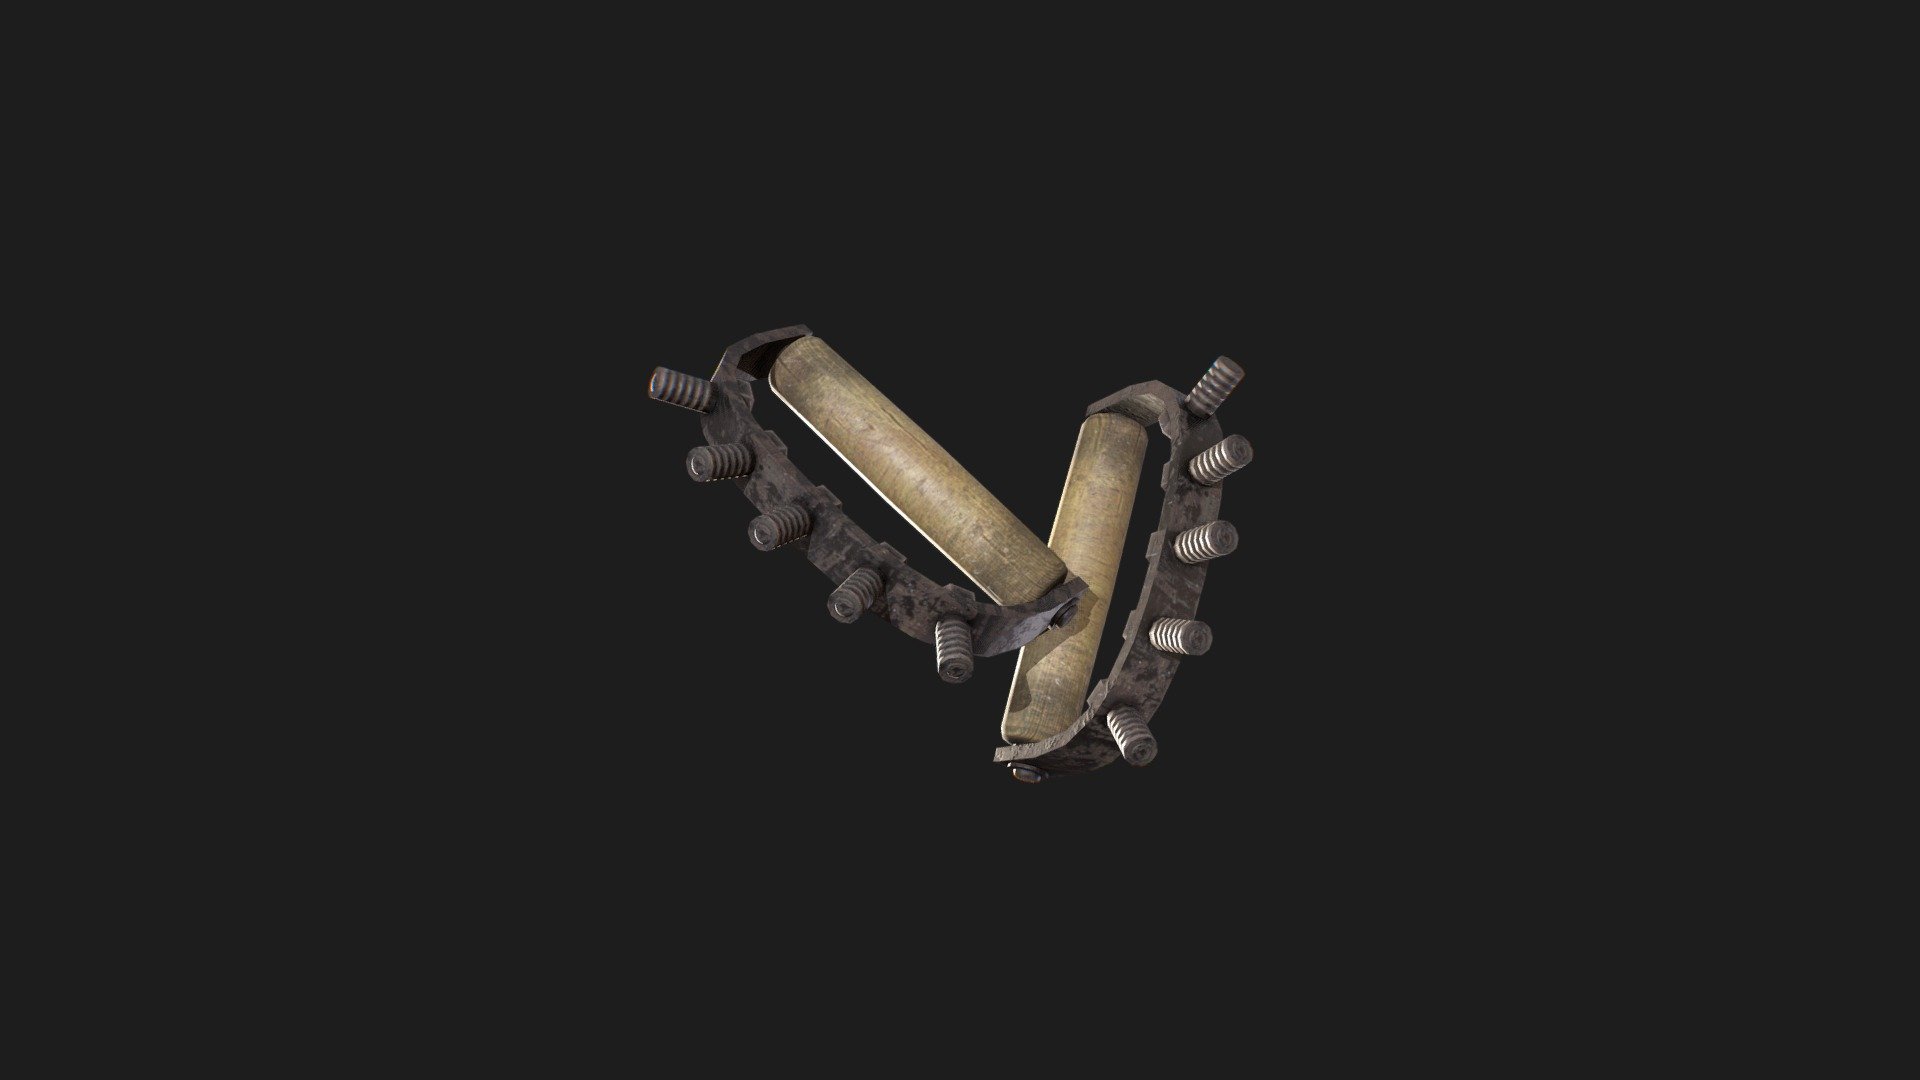 Some post apocalyptic, improvised brass knuckles made from wood handles, spare metall and screws. Perfect for smashing zombie heads!
4k PBR textures using the metallic workflow. Low poly and game ready optimized, enough details to look good in first person 3d model